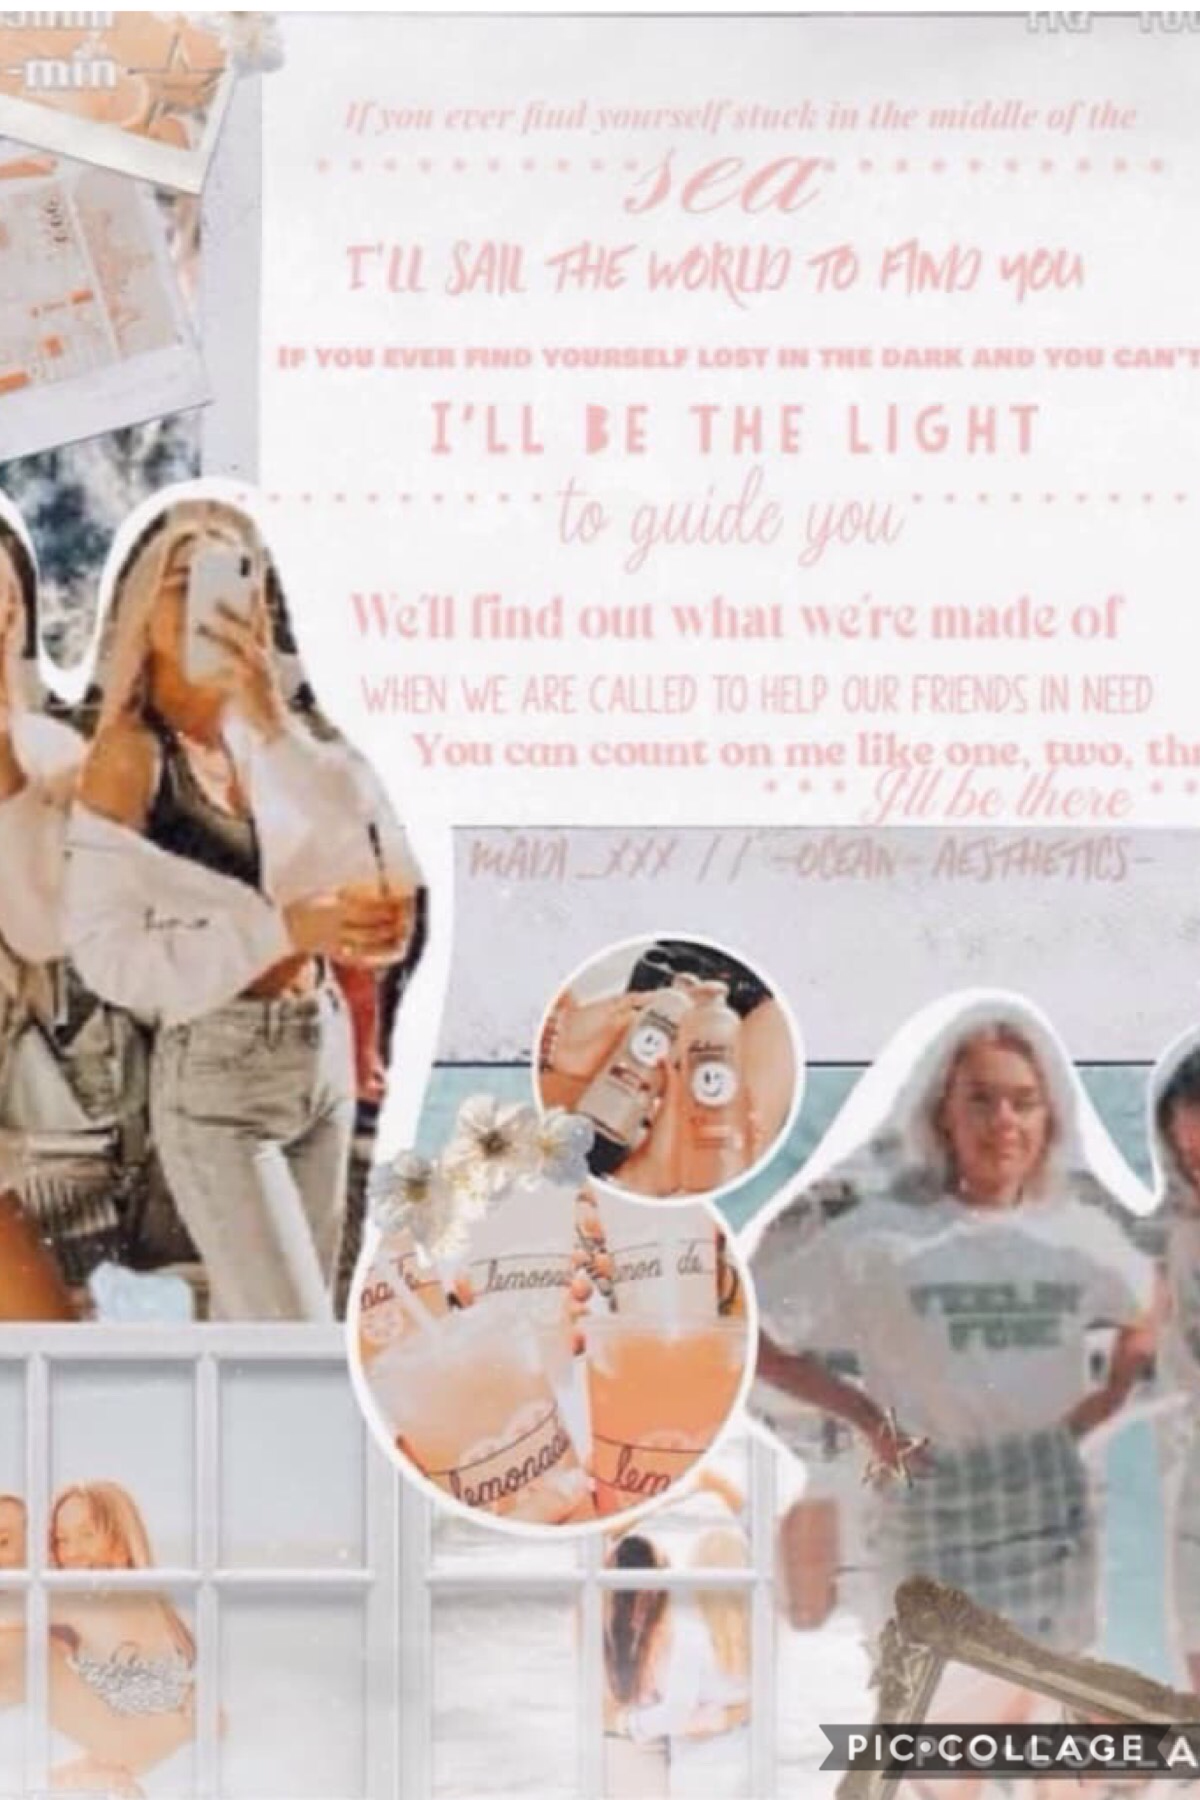 💕 1.3.21 💕
This is a collab I did with -ocean_aesthetic- :)
She did the amazing bg and I did the text! 
I really like how my first collab with her went. And we're lucky that my text just magically got super good 😂
Go give her some love and maybe even a fo